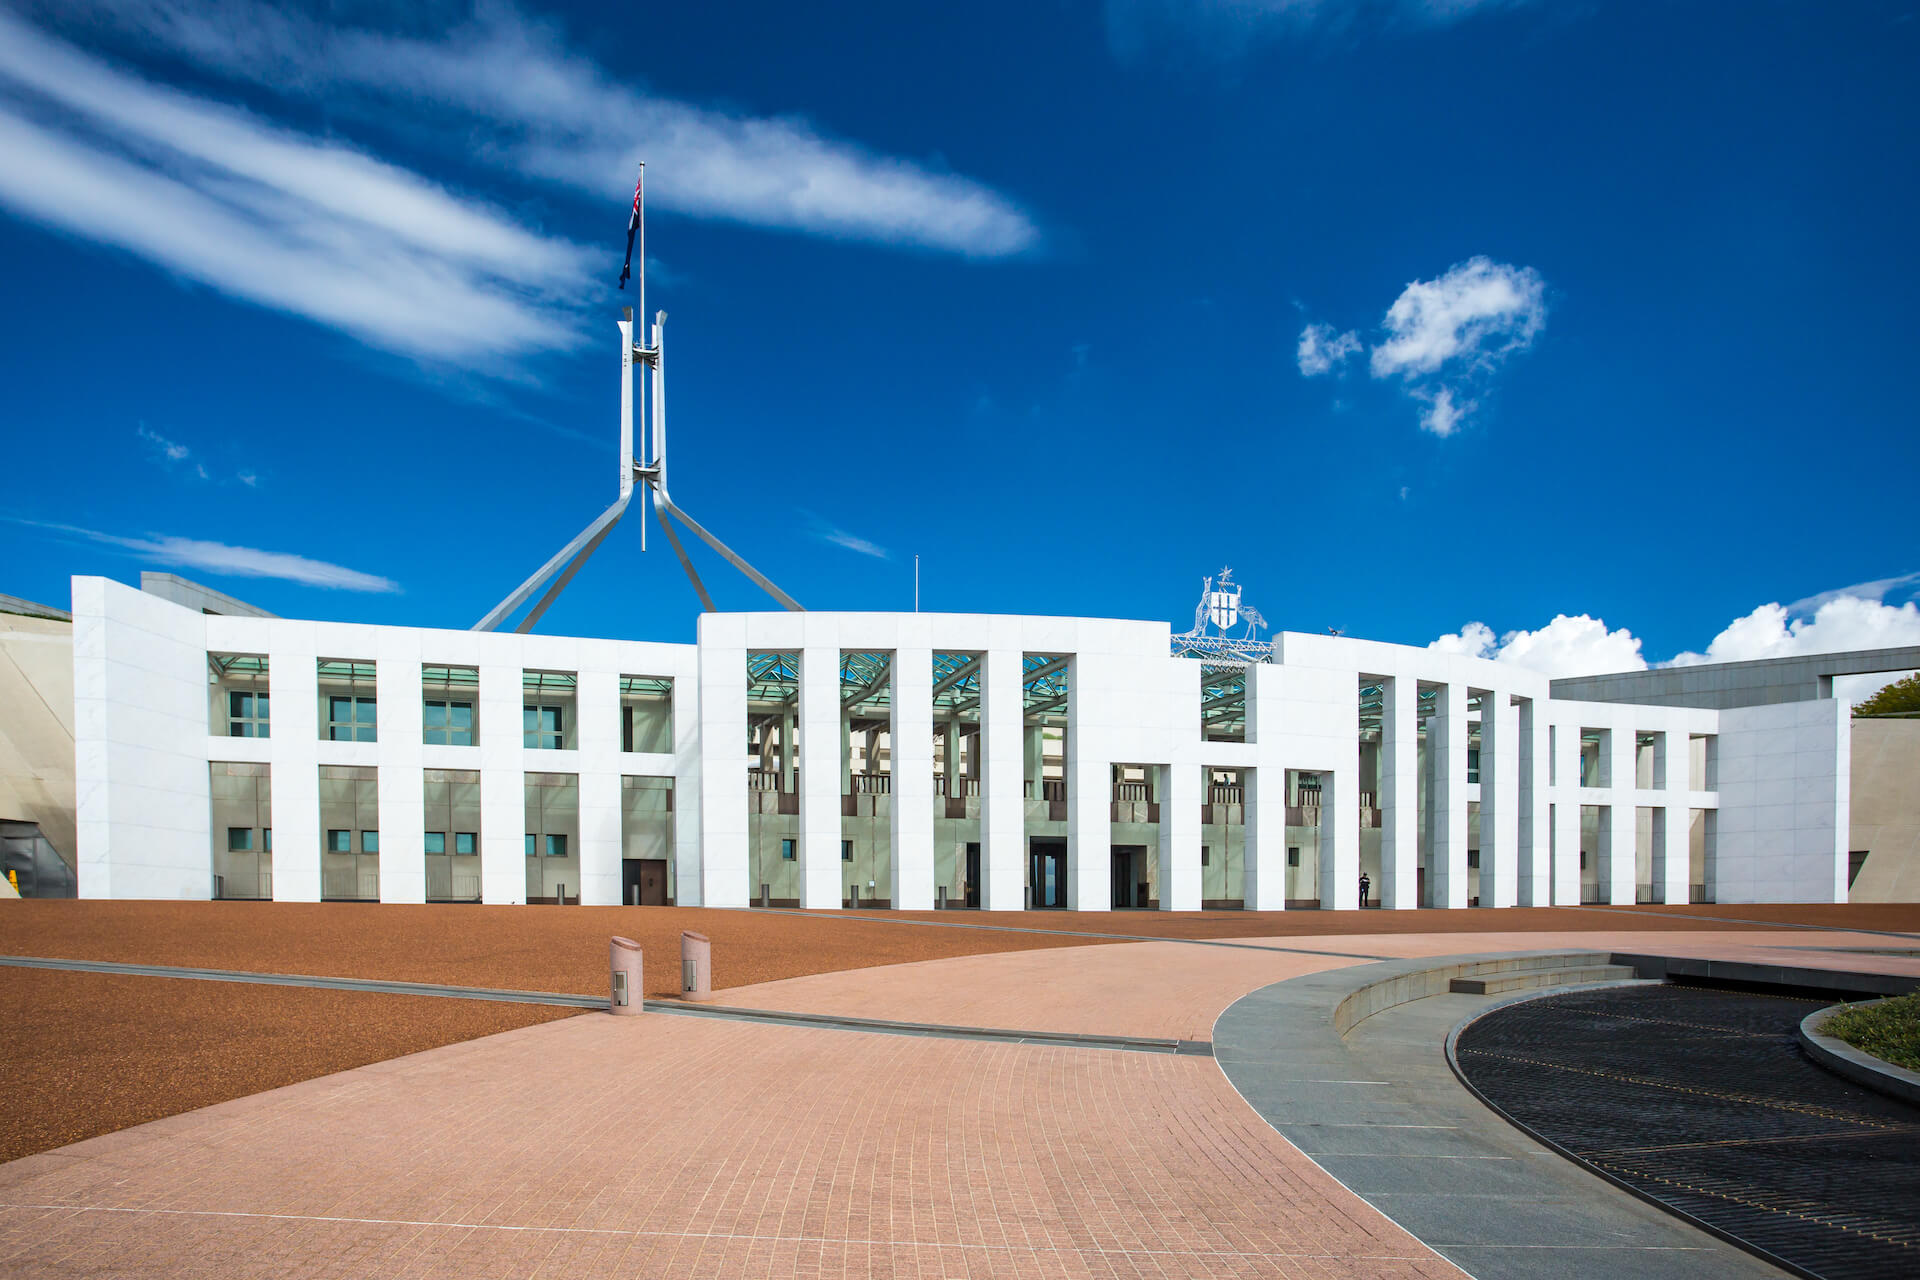 Picture of the Australian parliament building | Featured image for the Blog on the Innovative Architects that Have Changed Architecture from Clements Clarke Architects.